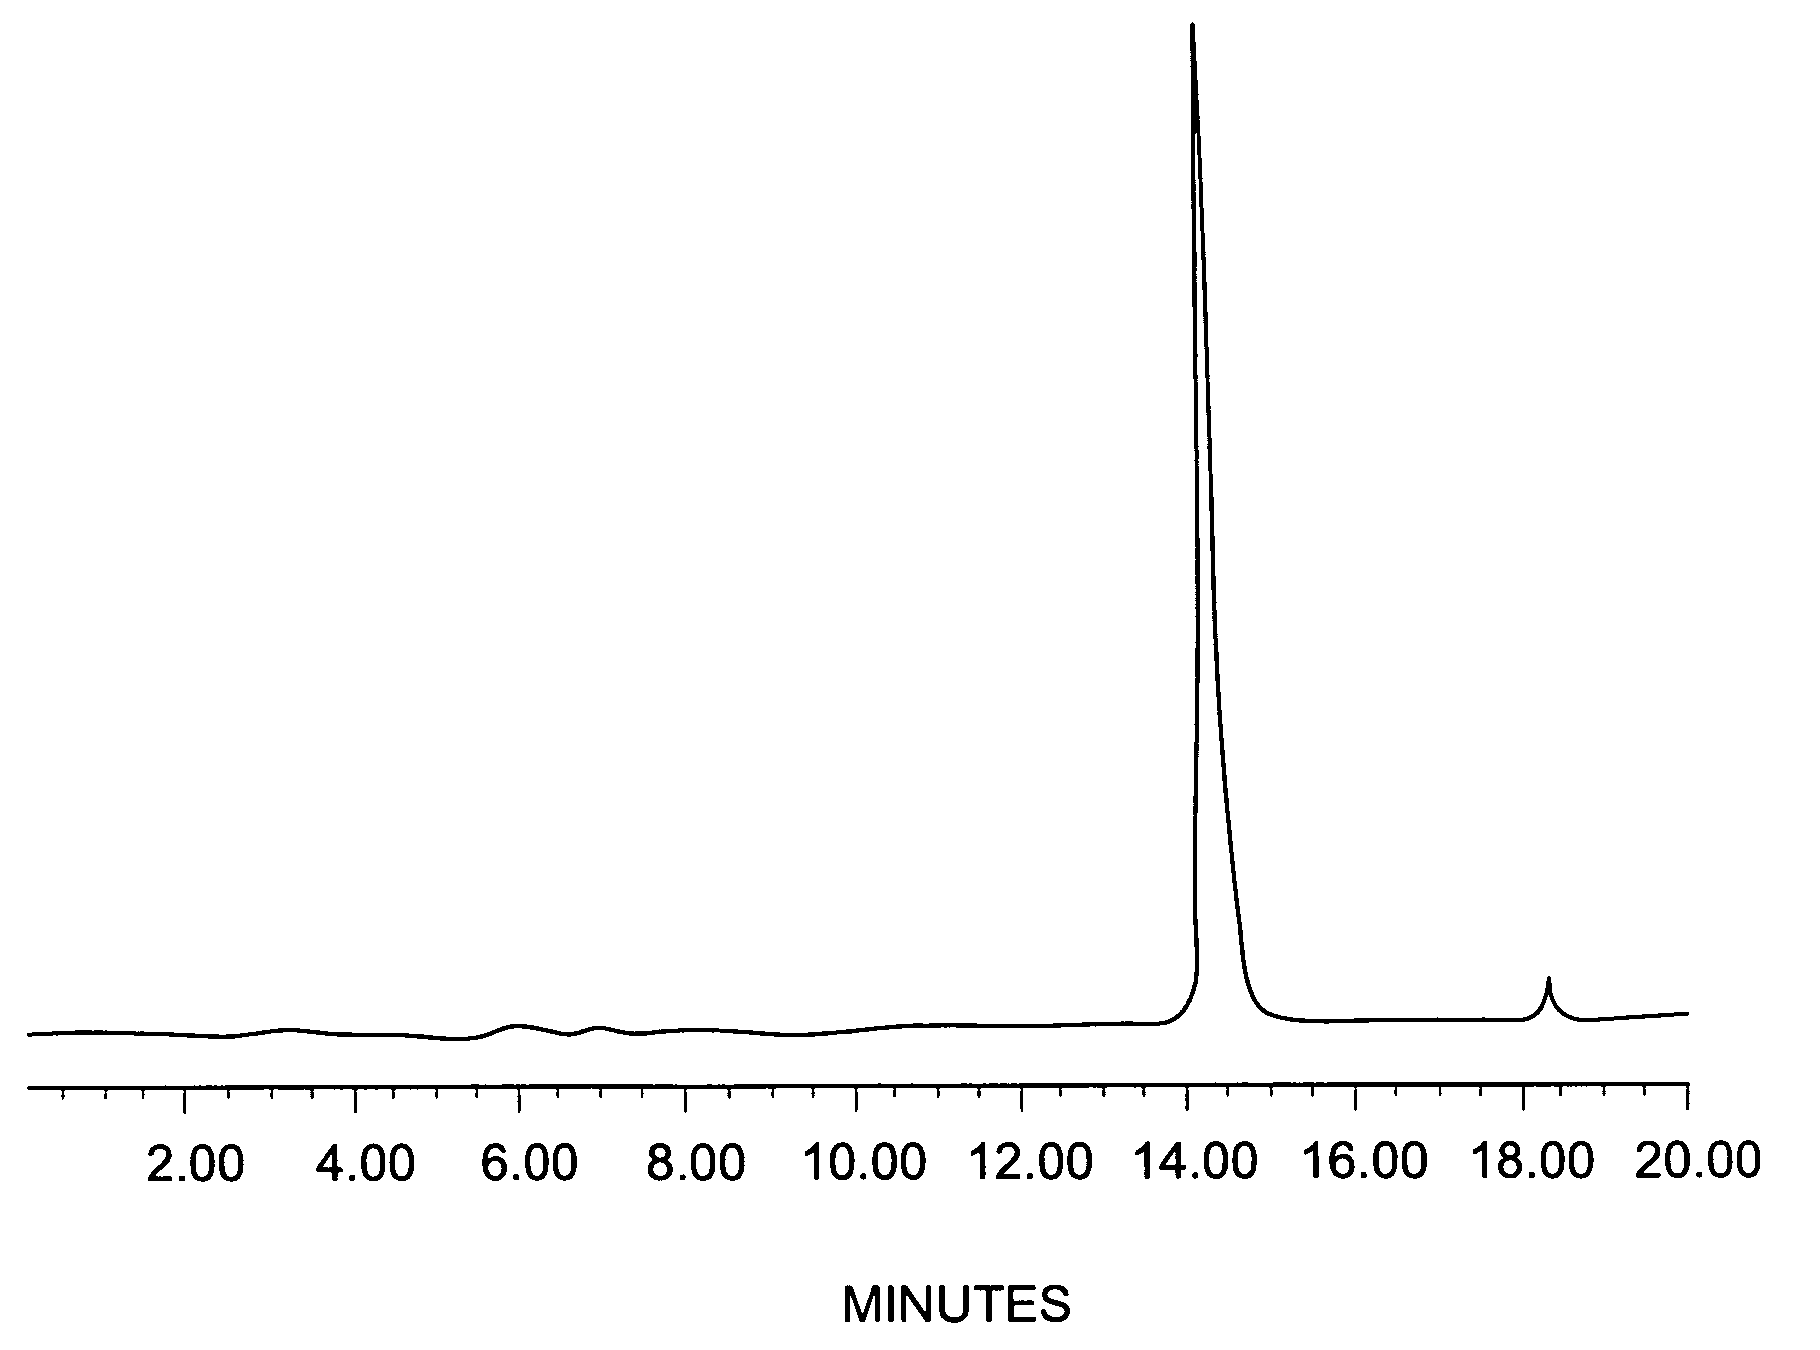 Fluorine-labeled compounds